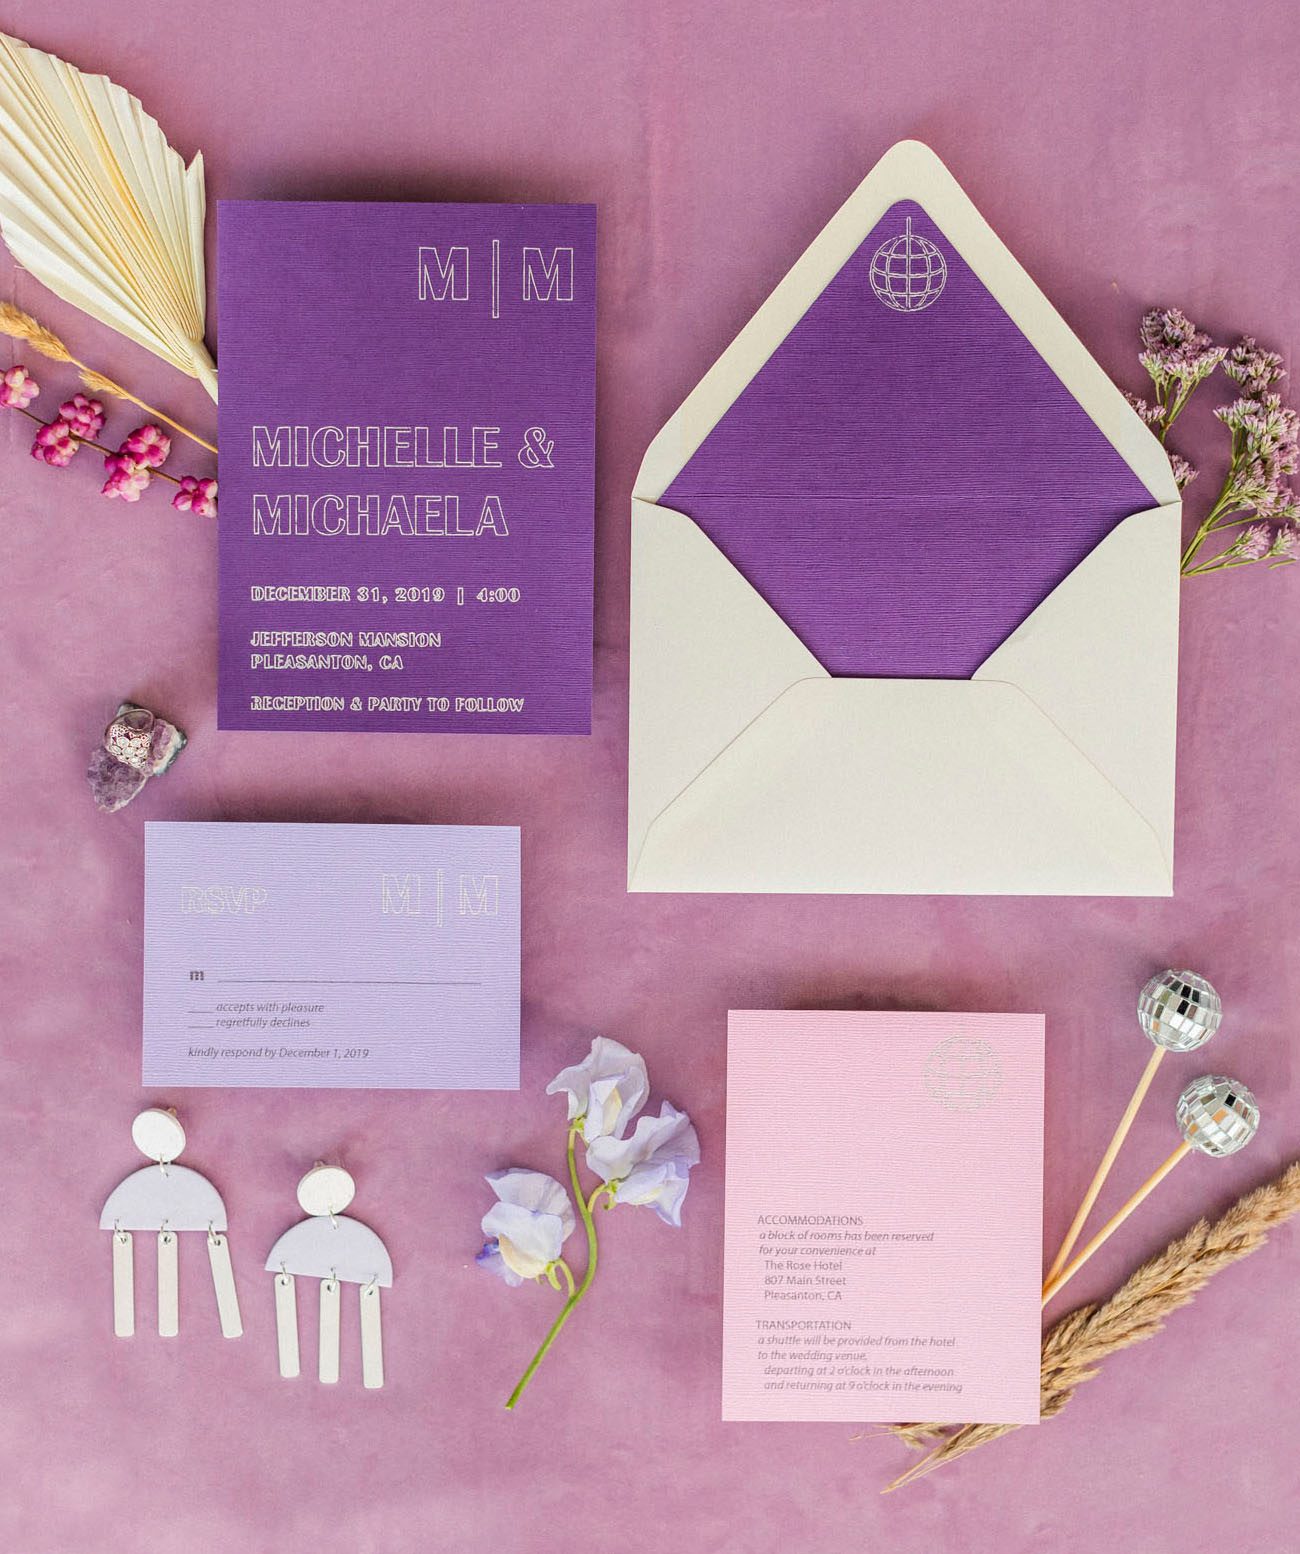 The wedding invitation suite was done in purple, lilac and neutrals